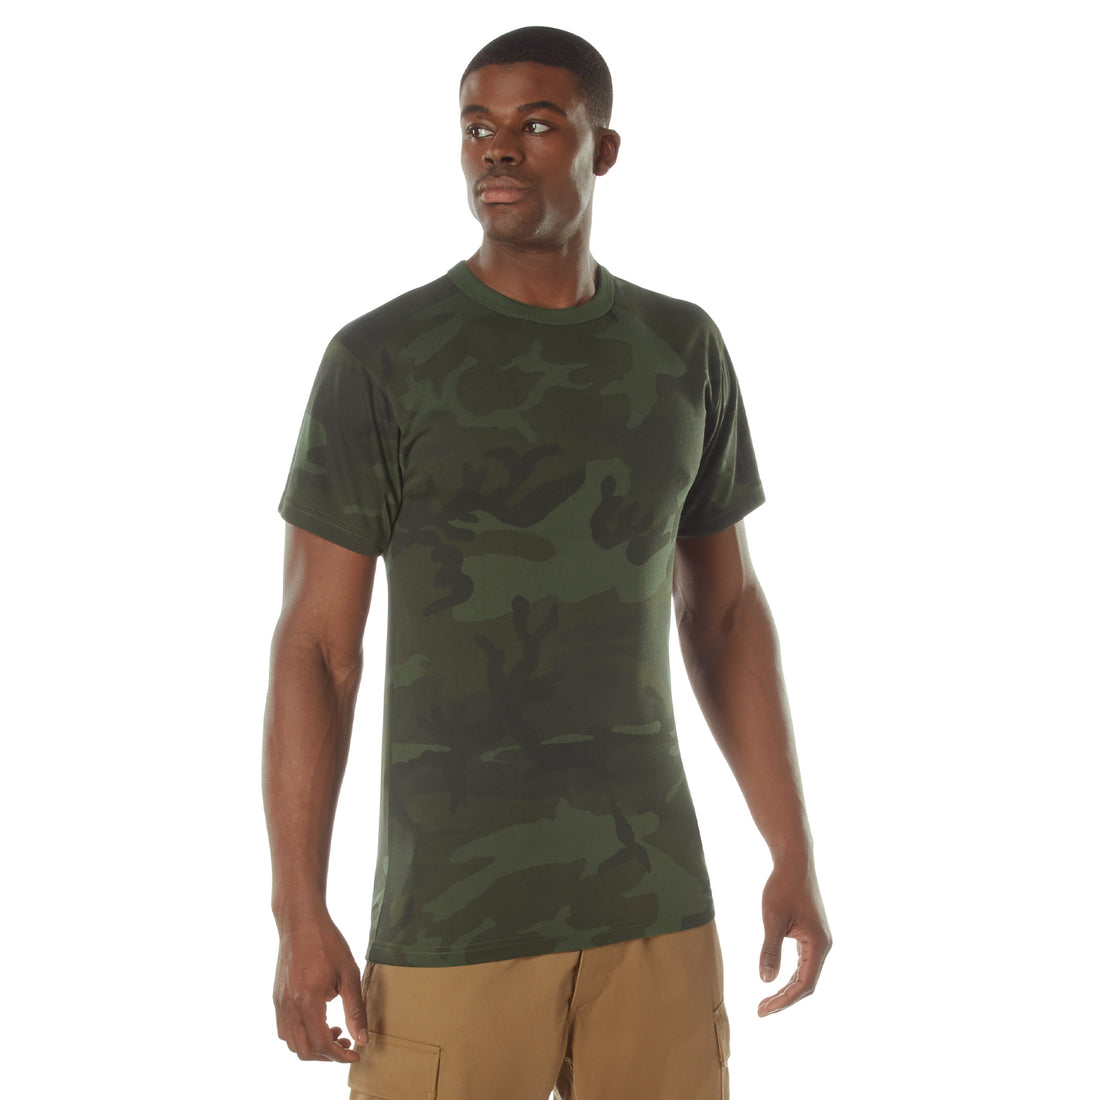 Rothco Moisture Wicking T-Shirt in Midnight Woodland Camo!